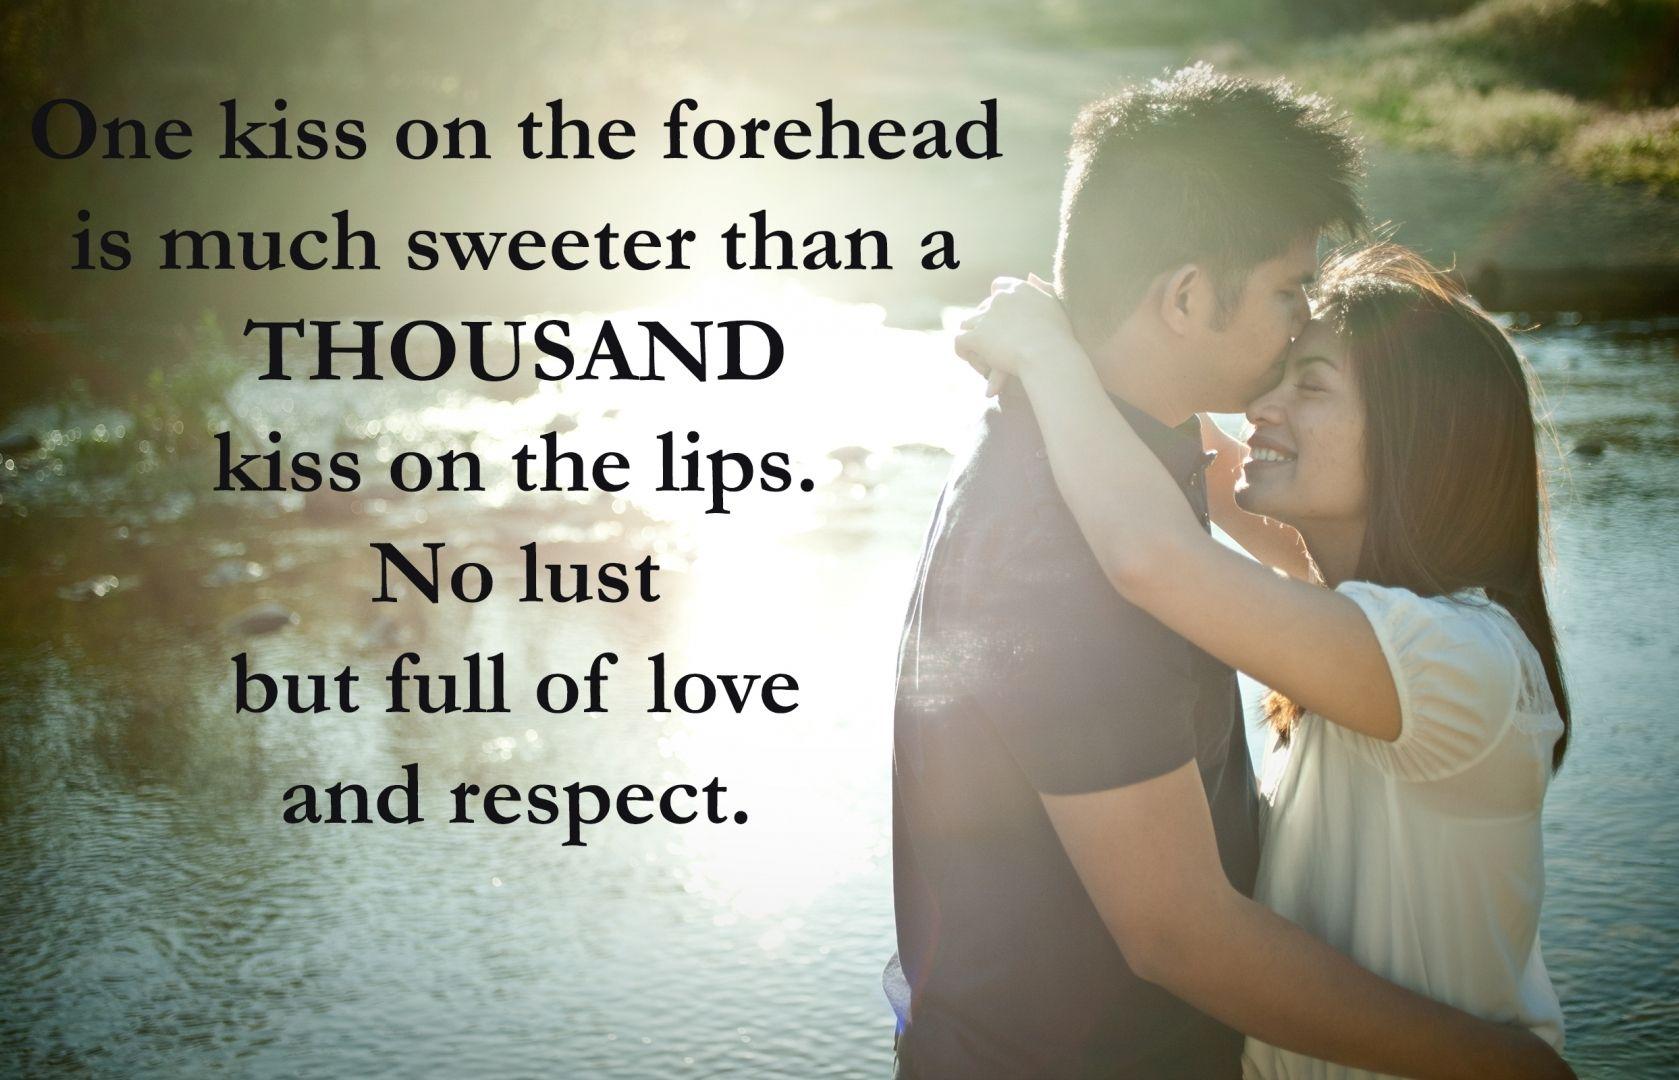 Romantic Couple Hug Images With Quotes Hug Quotes Love Quotes Funny Quotes Sweet Dream